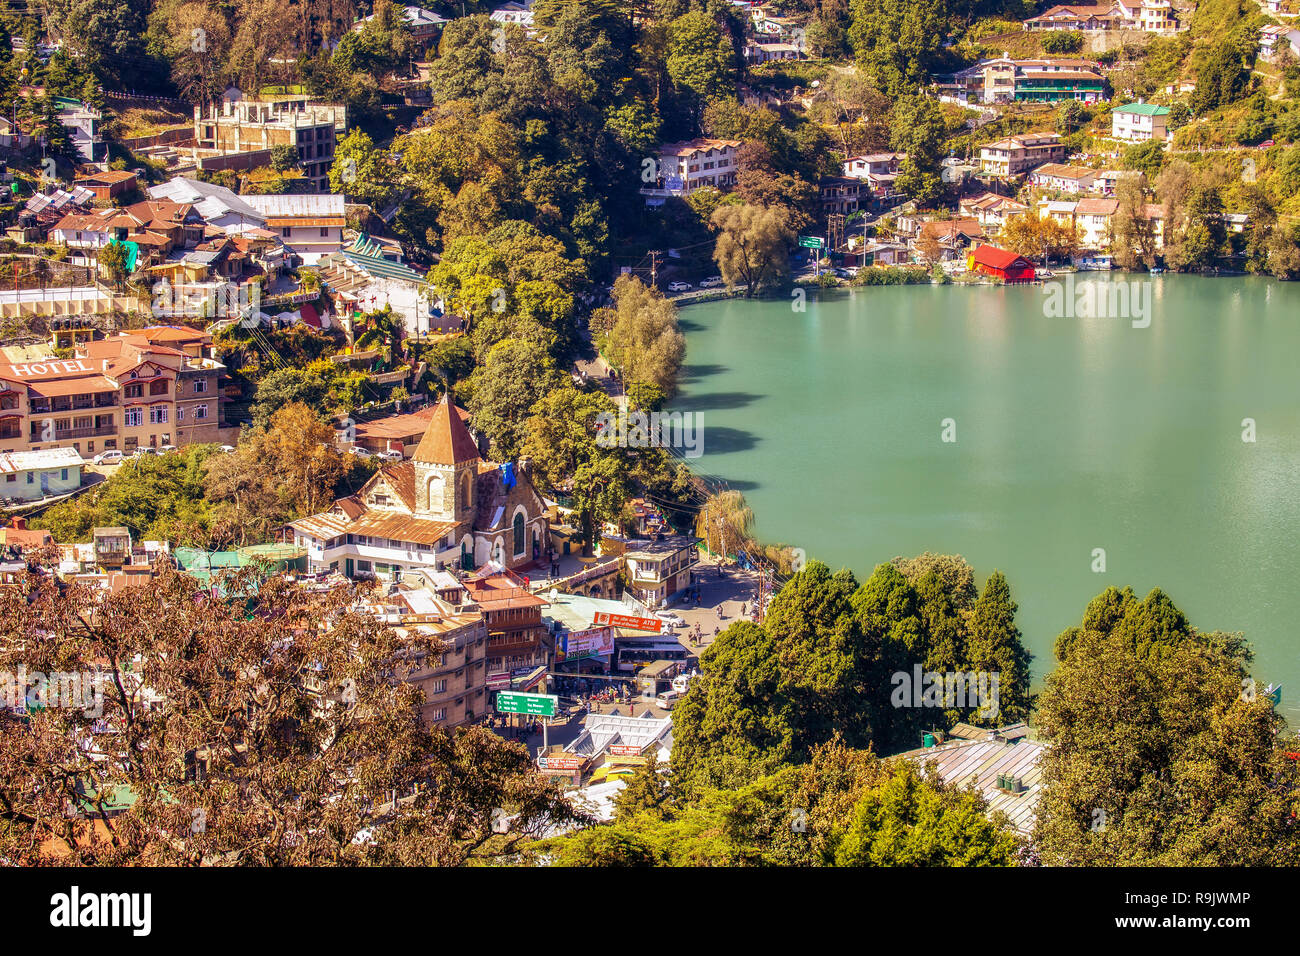 Aerial view of Nainital cityscape with famous Nainital lake considered as a scenic hill station and tourist destination at Uttarakhand India Stock Photo